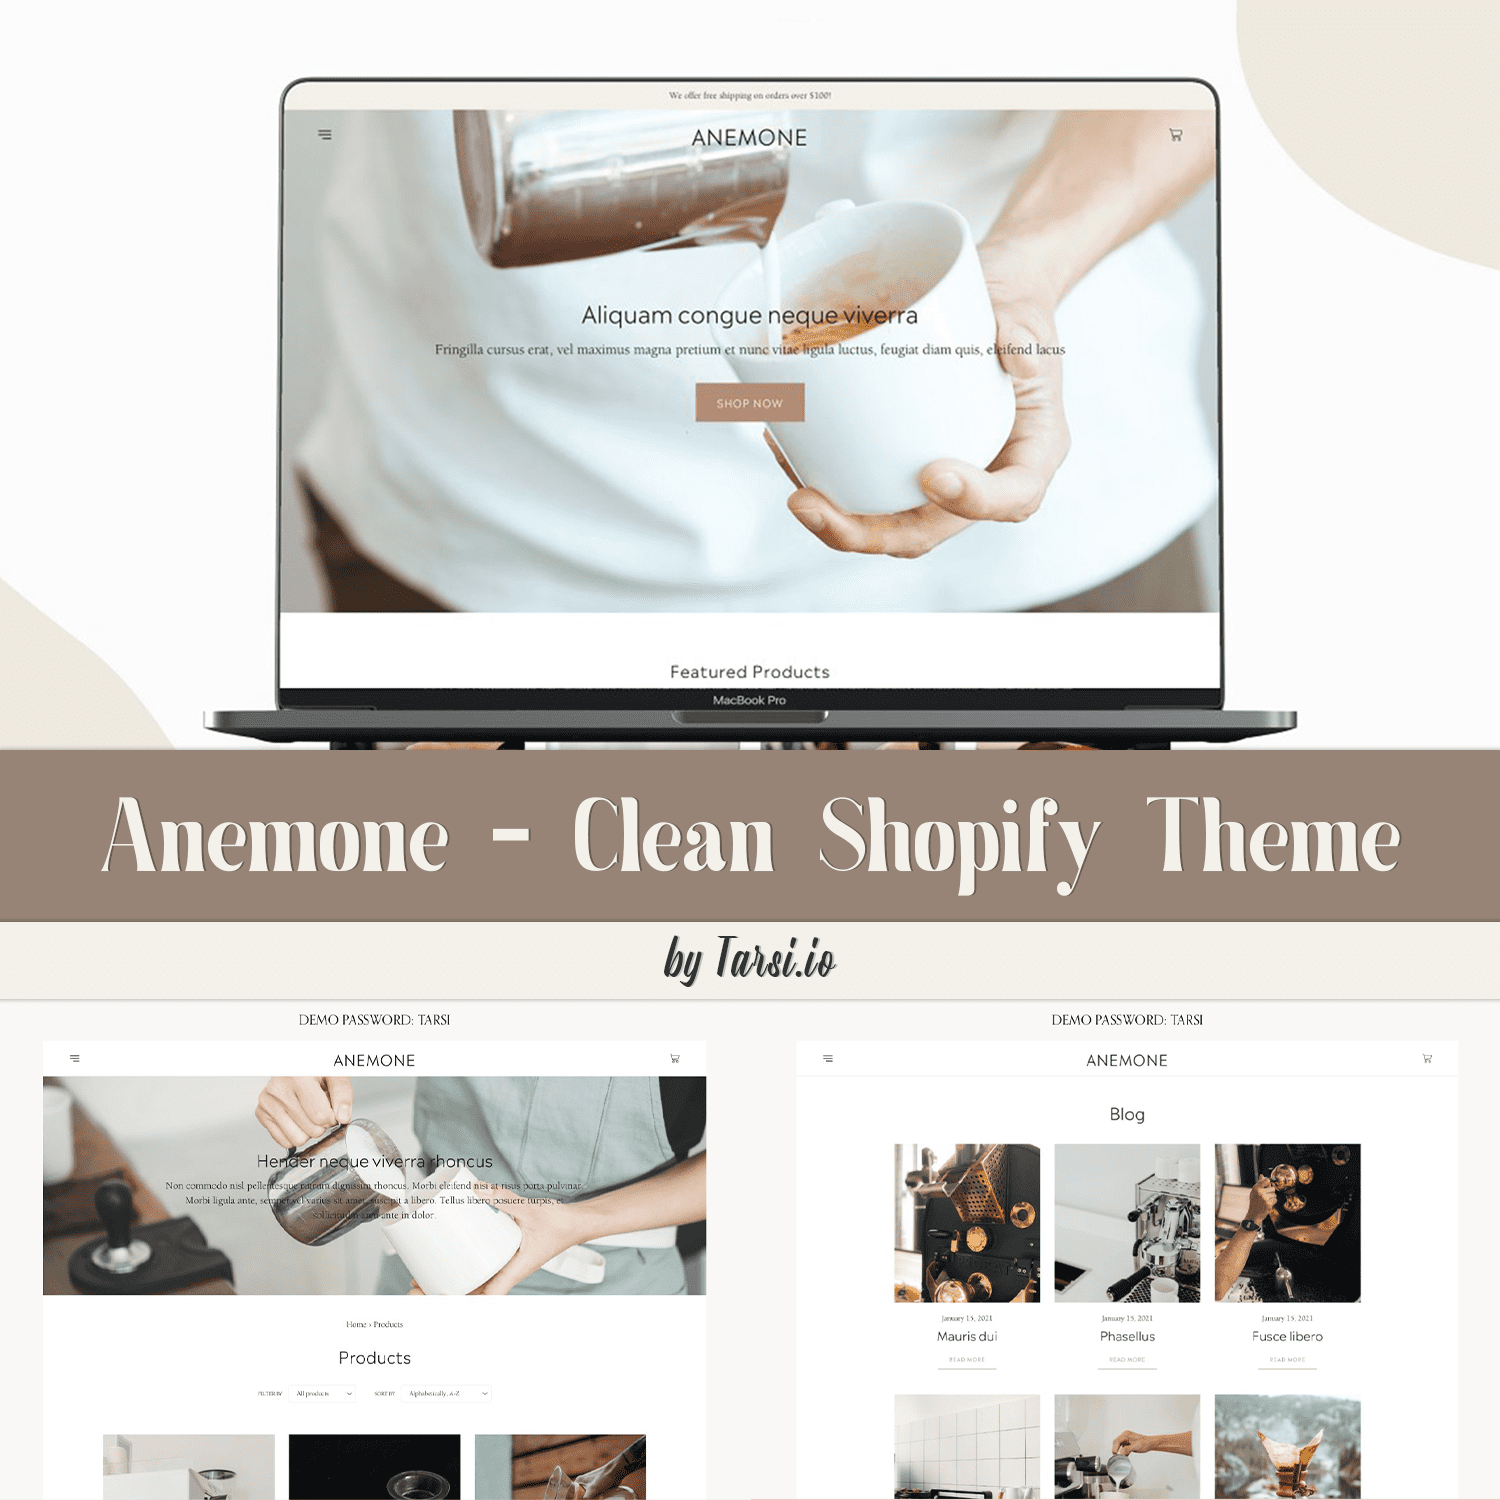 Anemone - Clean Shopify Theme cover.